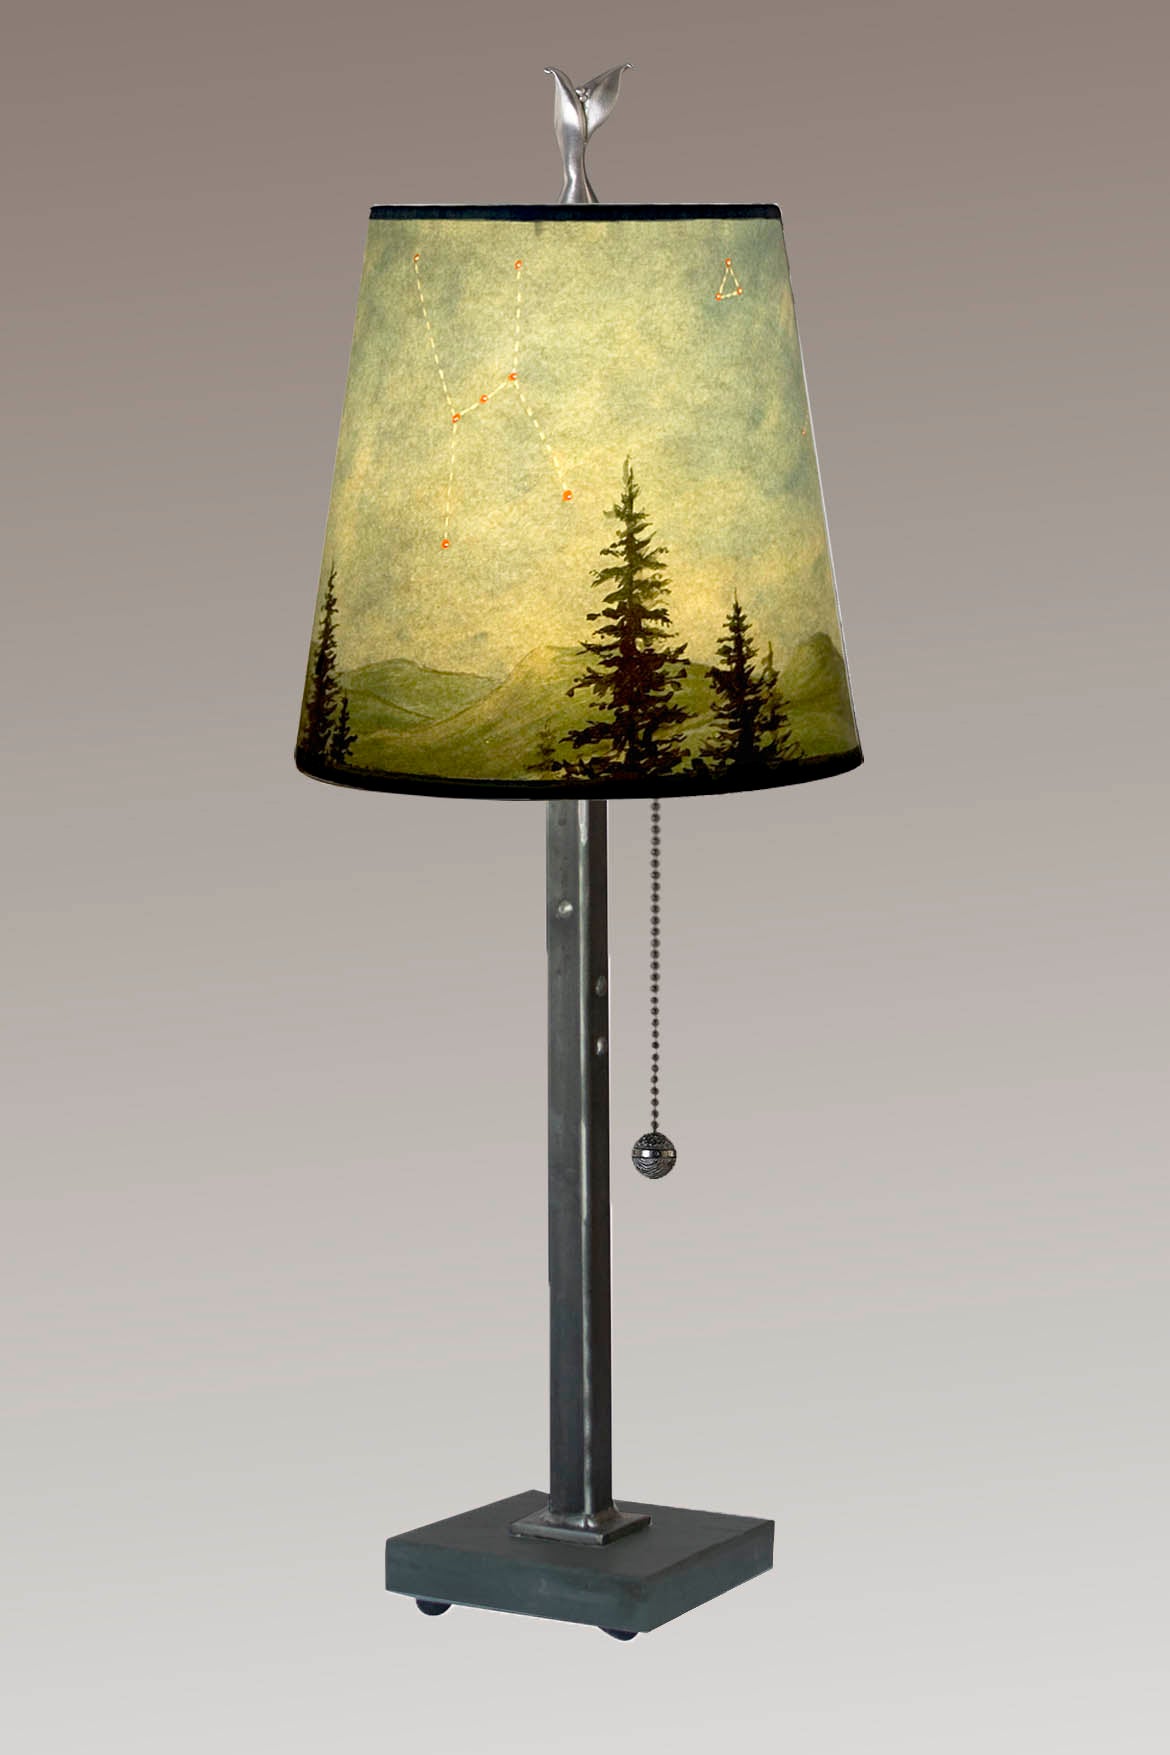 Janna Ugone & Co Table Lamp Steel Table Lamp with Small Drum Shade in Midnight